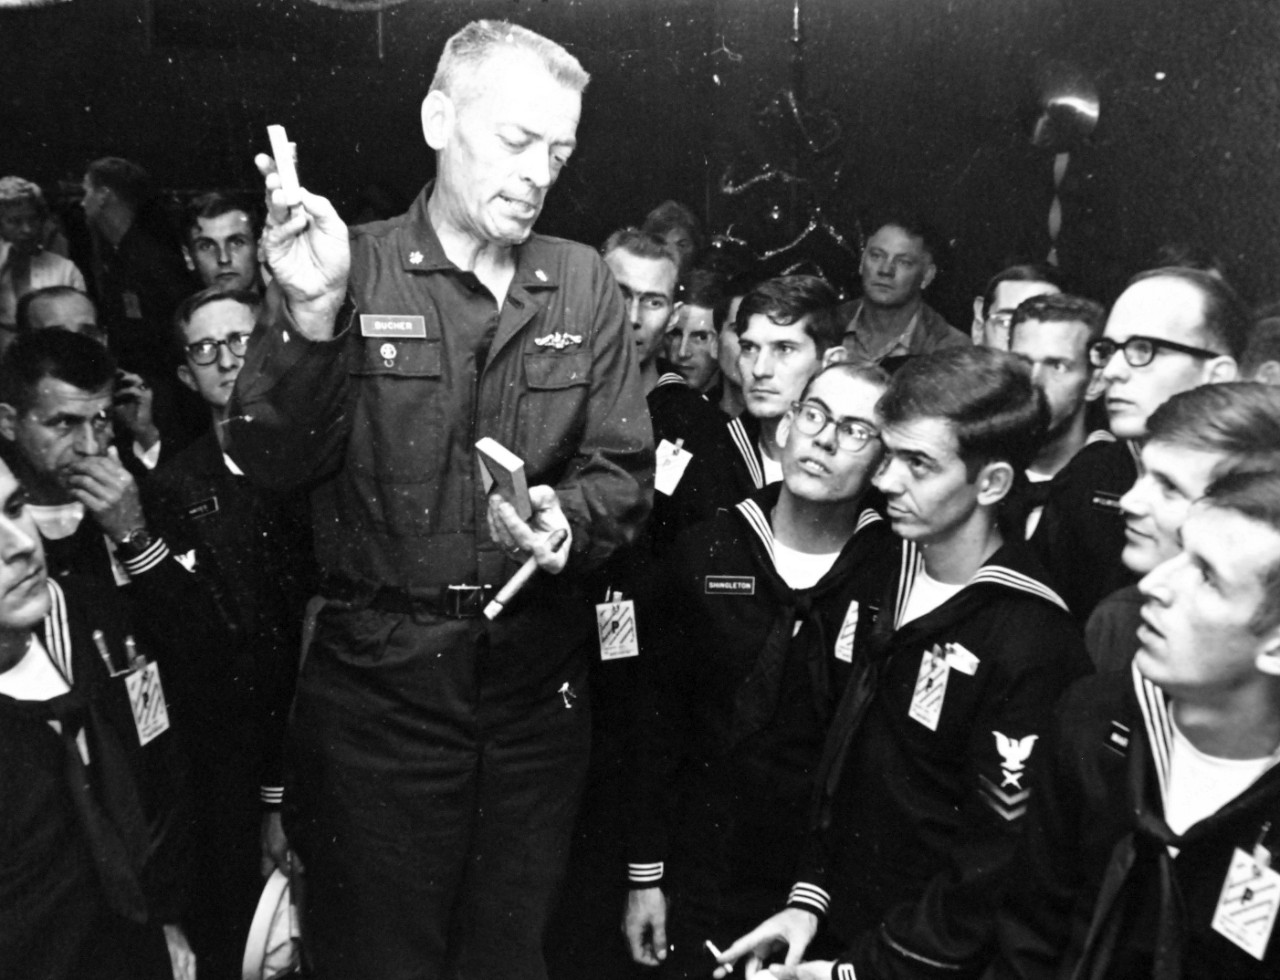 428-GX-USN-1140195:   San Diego, California, December 25, 1968.   Commander Lloyd M. Bucher, Commanding Officer of USS Pueblo (AGER-2), talks with the released crew of the ship at the Balboa Naval Hospital.  Official U.S. Navy Photograph, now in the collections of the National Archives.  (2017/05/23).  Photographed from reference card.   